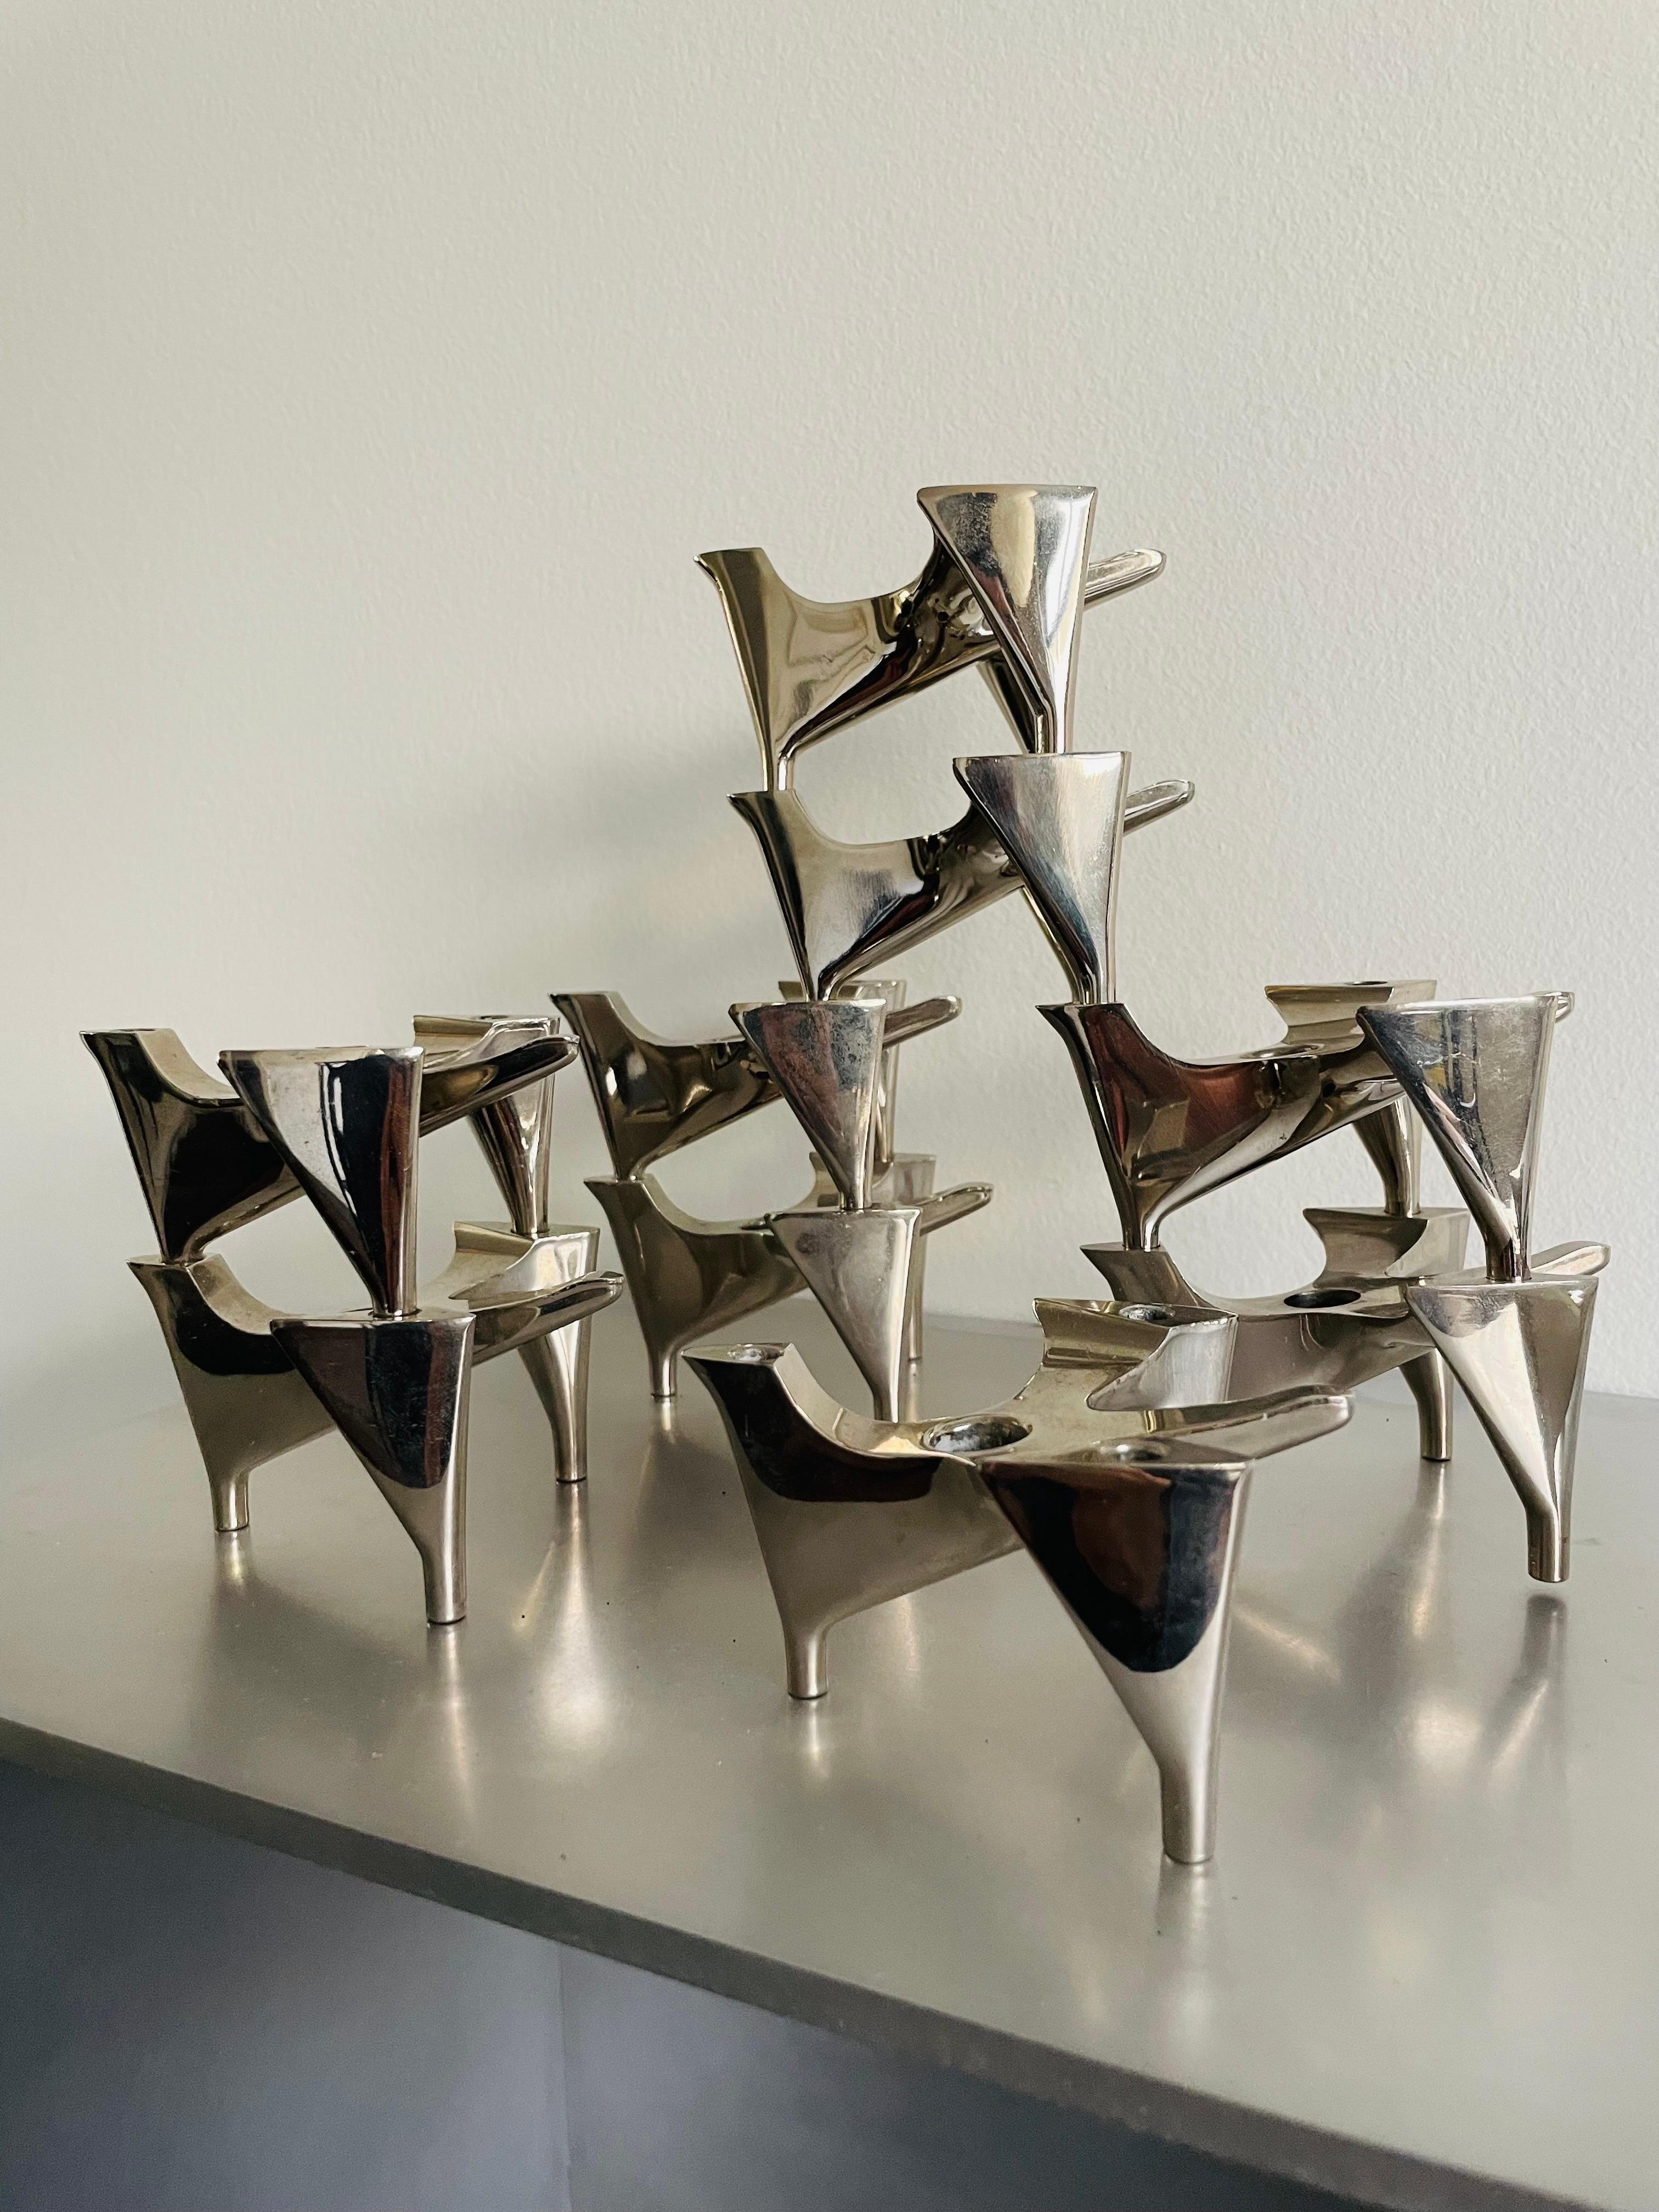 'Vogelflug' (birdflight) candle holders by Hammonia-Motard.
A rare set of stackable, chrome-plated candle holders in a beautiful condition.
Price is for each piece. (10) available.

Made in Germany, Circa 1960s.

Chrome plated.

Dimensions of each